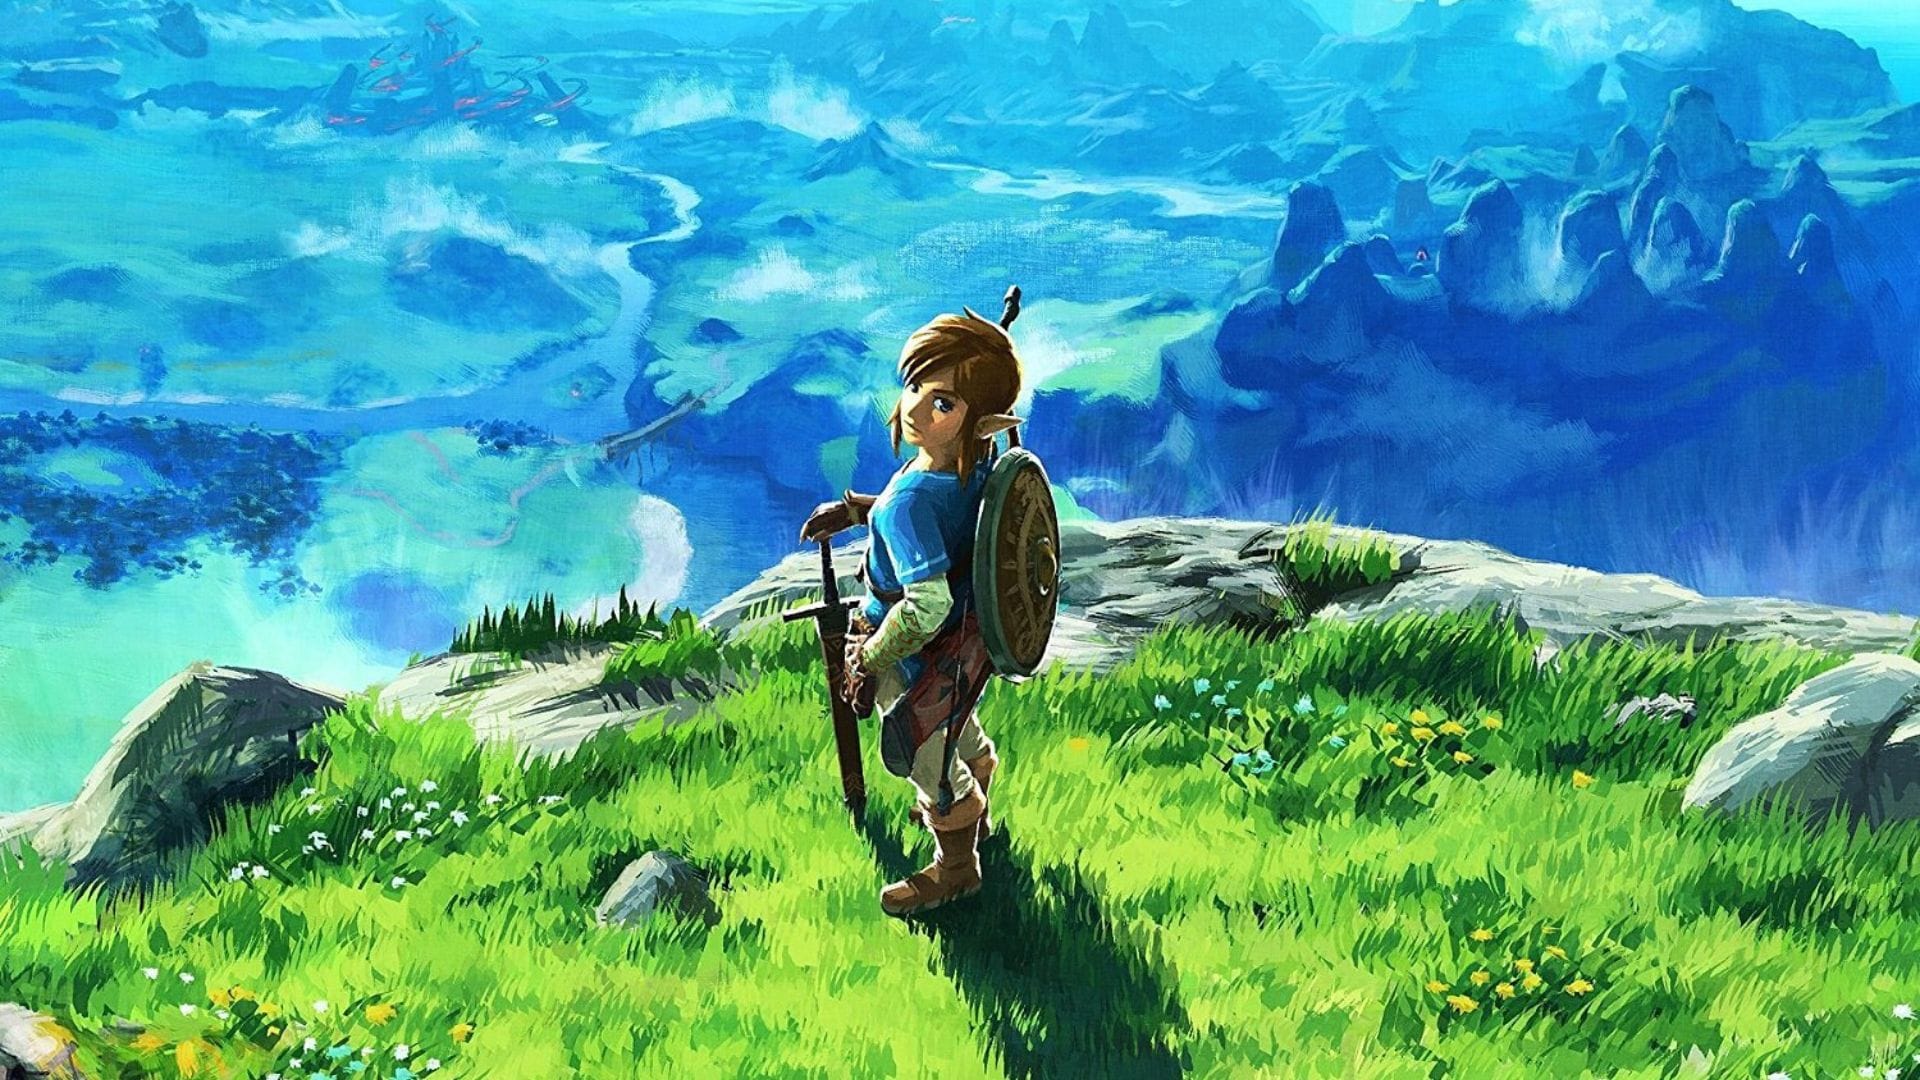 Breath of the Wild 1 Year Later: Great Game, Average Legend of Zelda Title